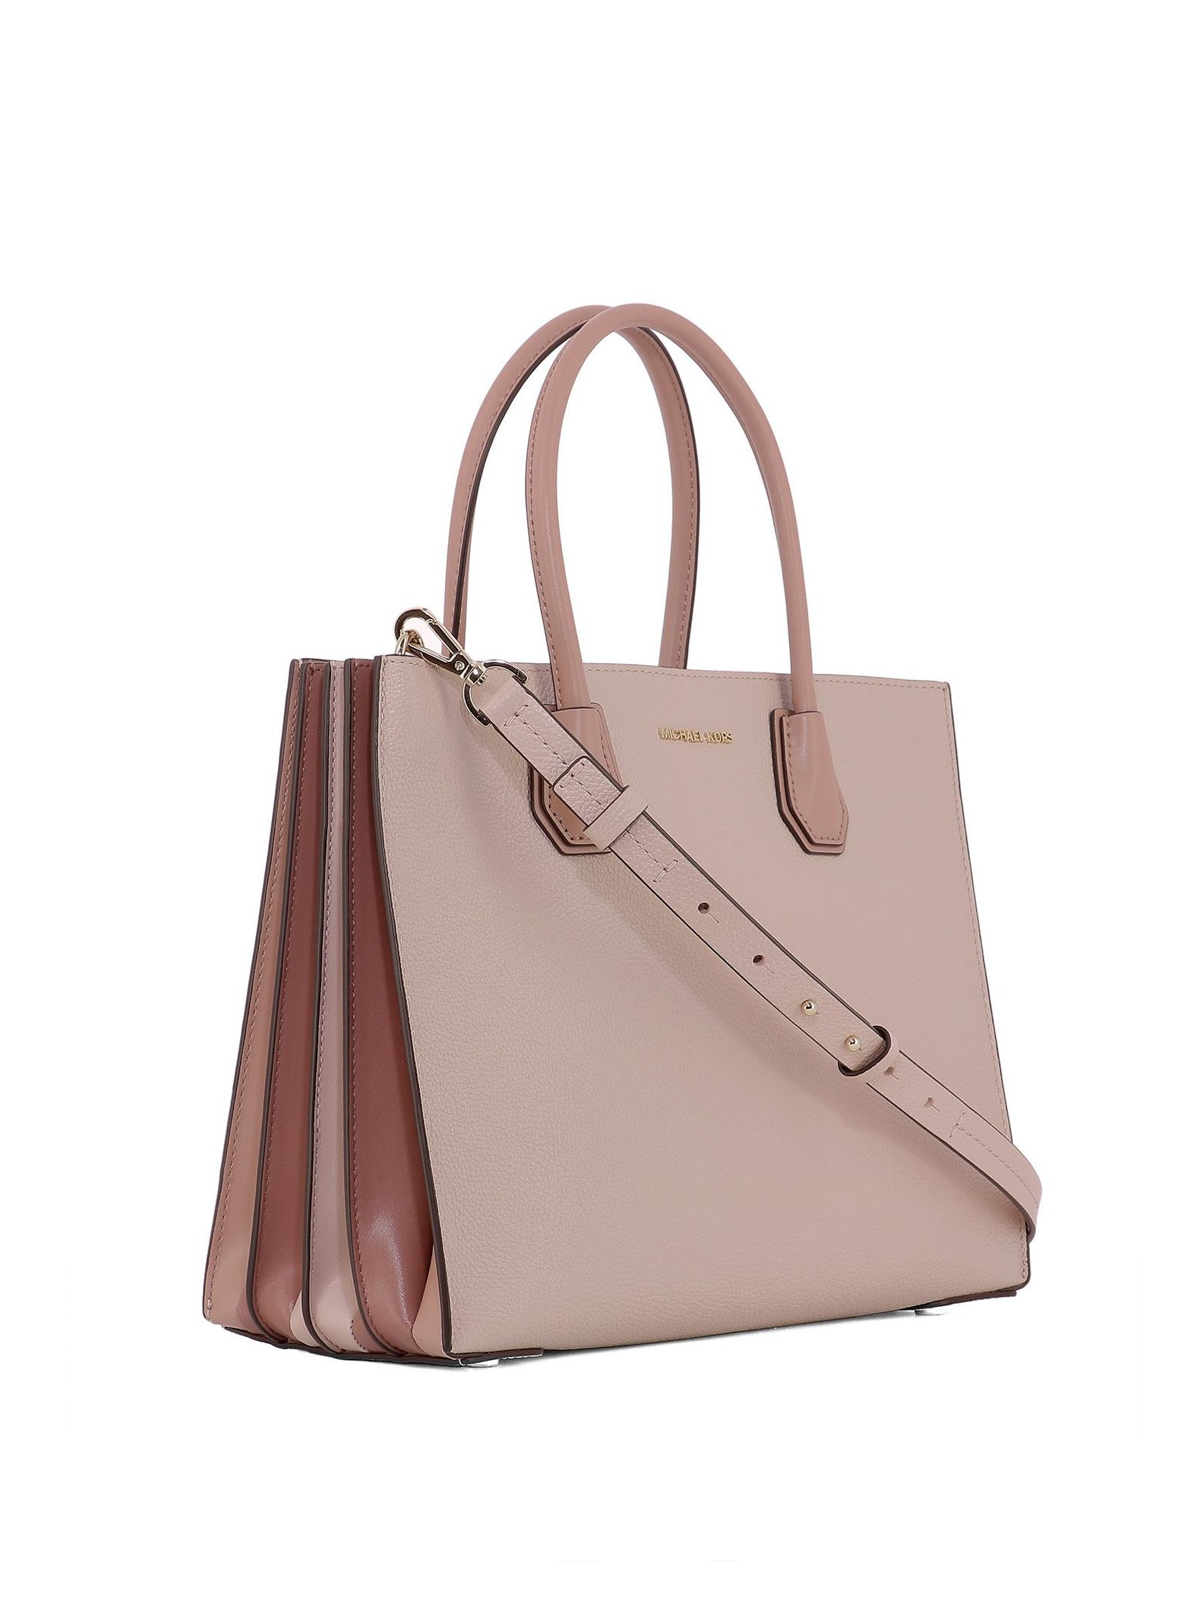 Michael Kors Mercer Large Color-block Saffiano Leather Tote Bag in